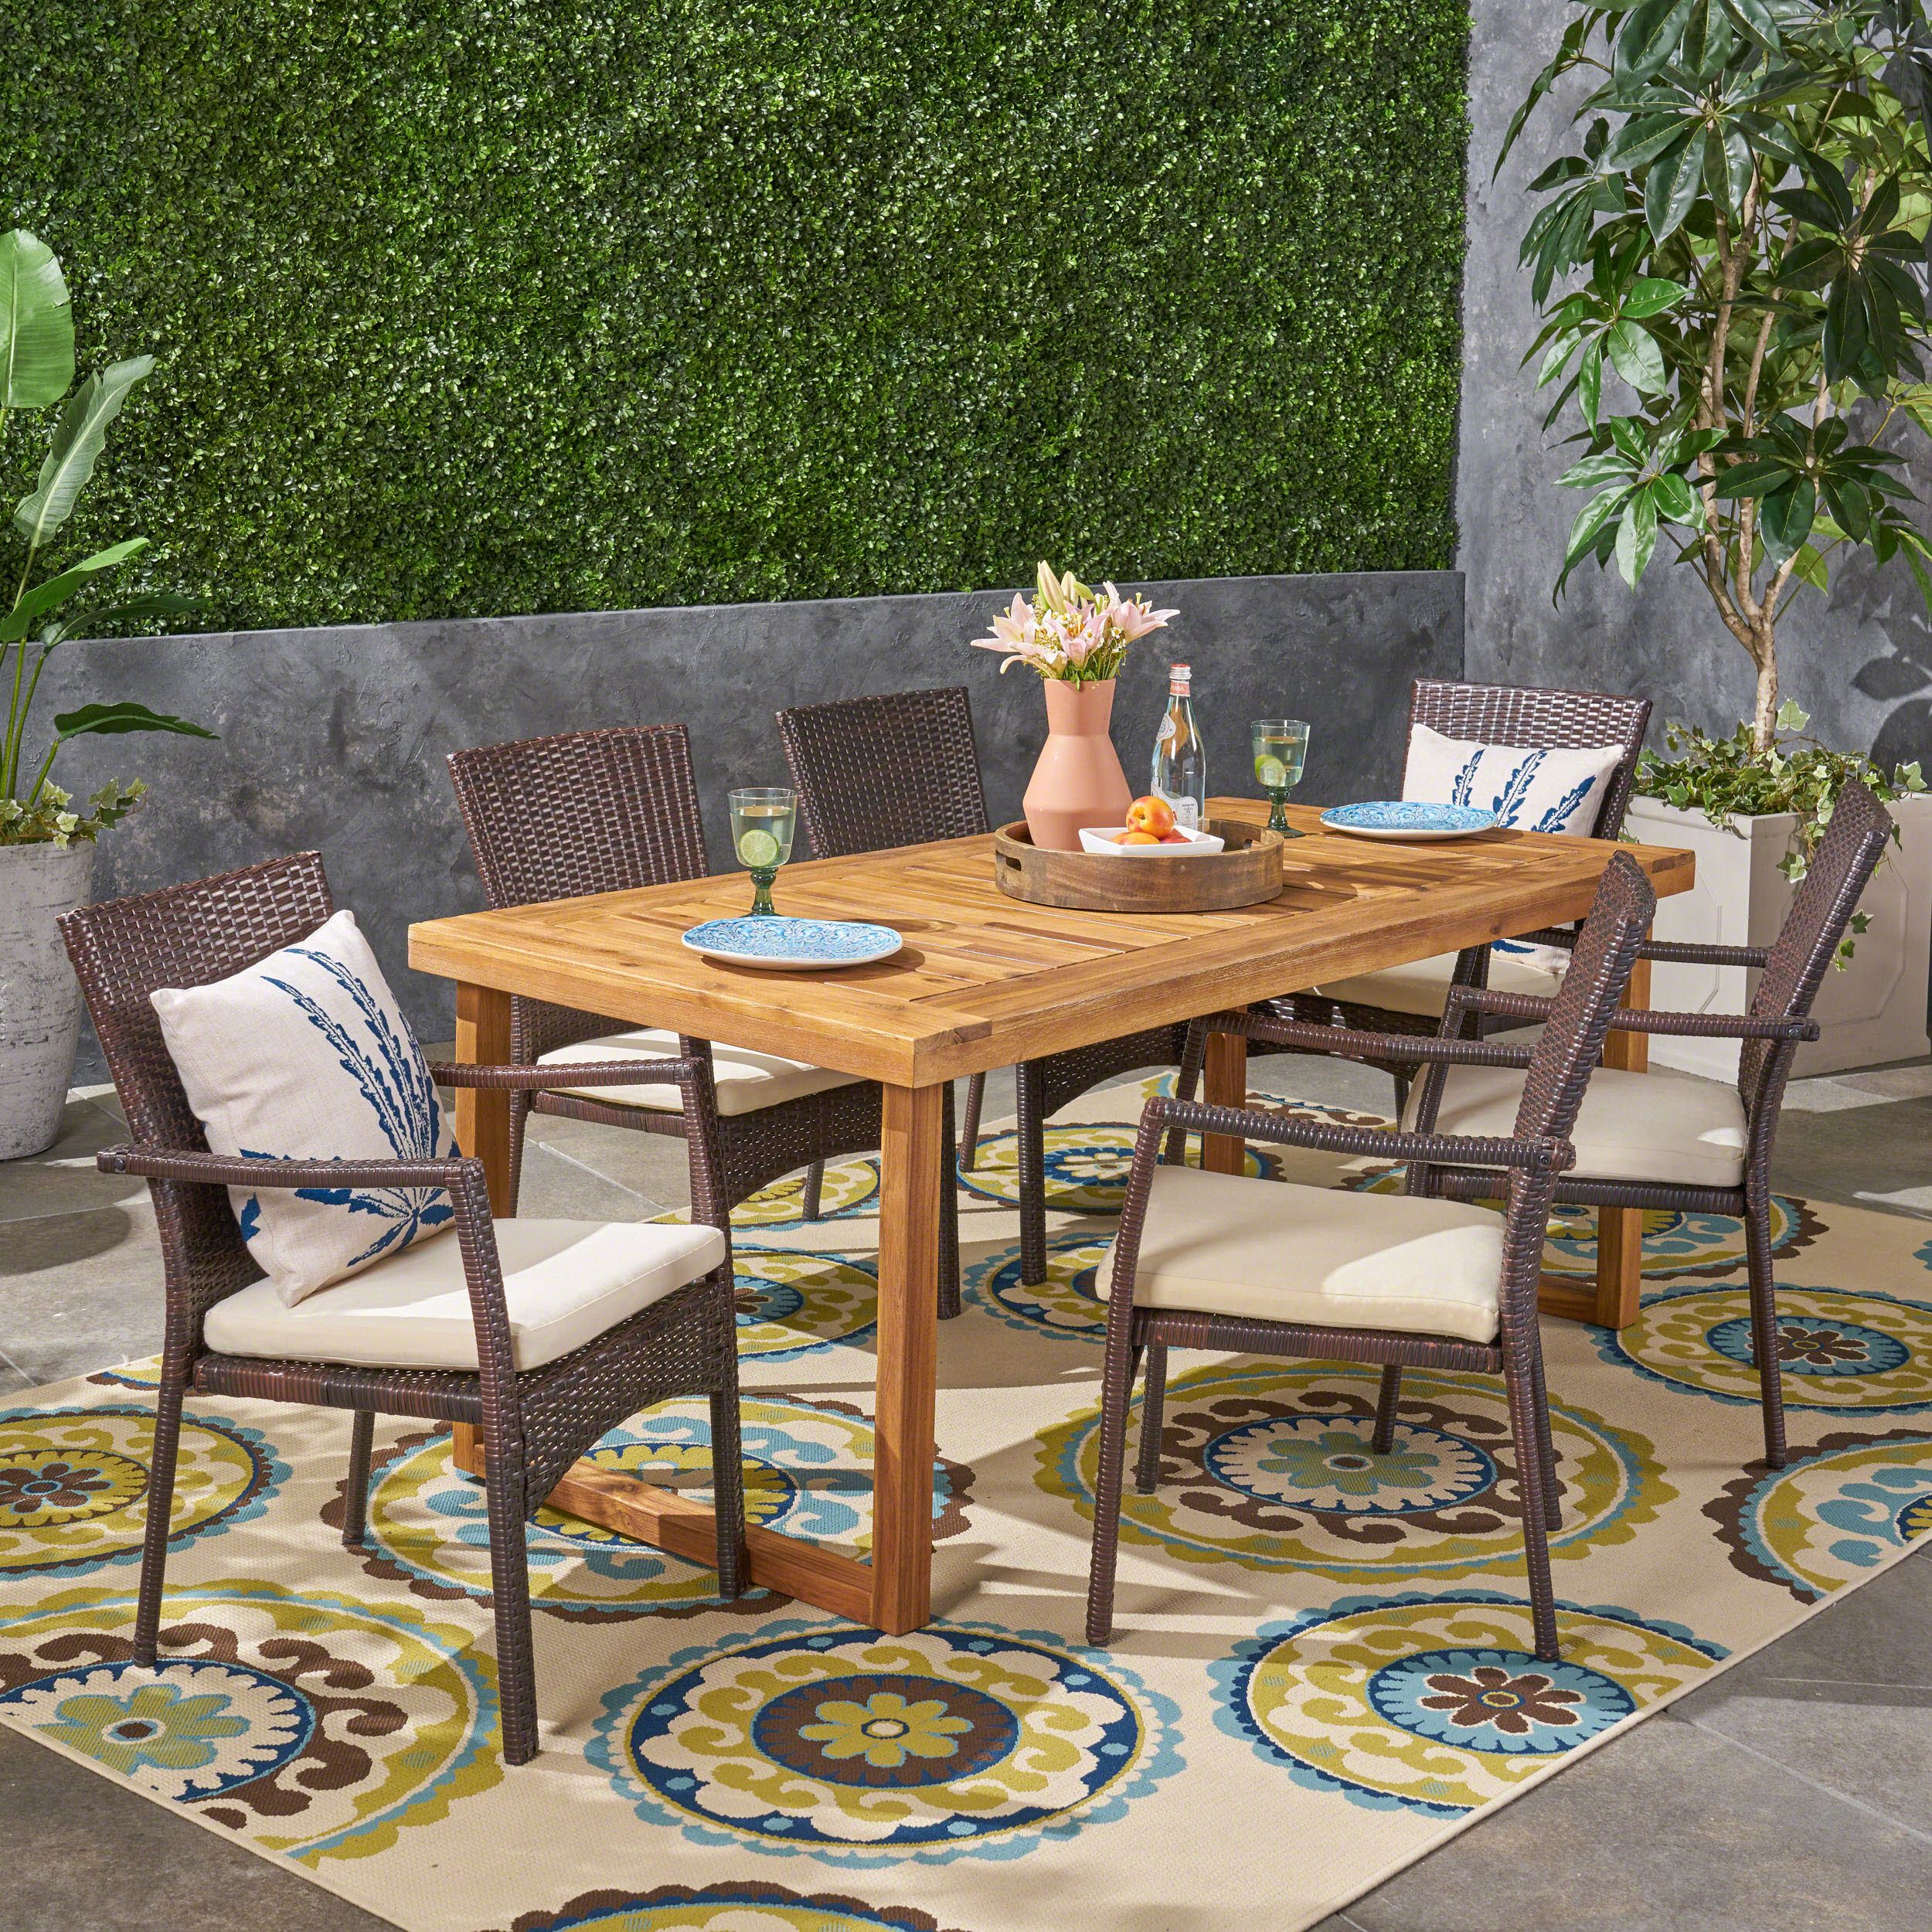 Lily Outdoor 7 Piece Acacia Wood Dining Set With Wicker Chairs And Regarding 7 Piece Patio Dining Sets (View 2 of 15)